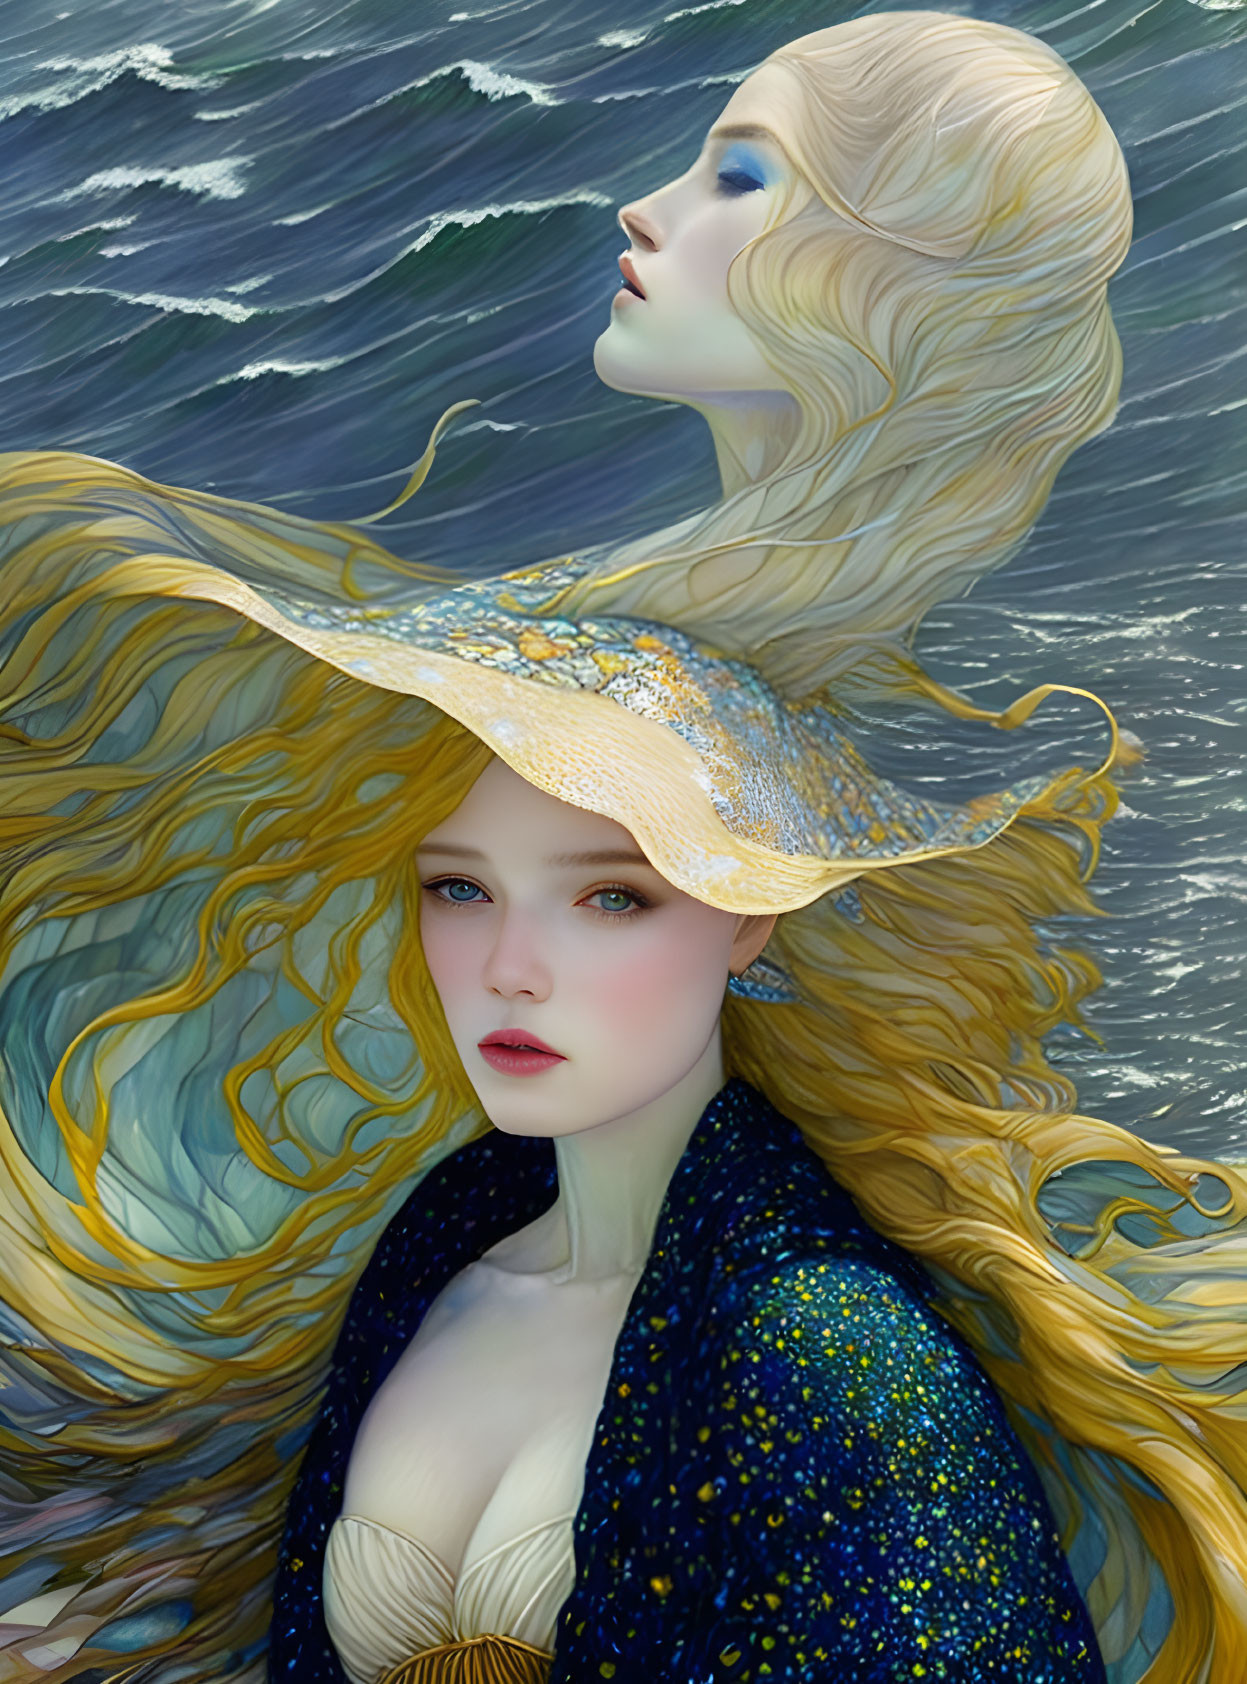 ocean and girl with gold hair